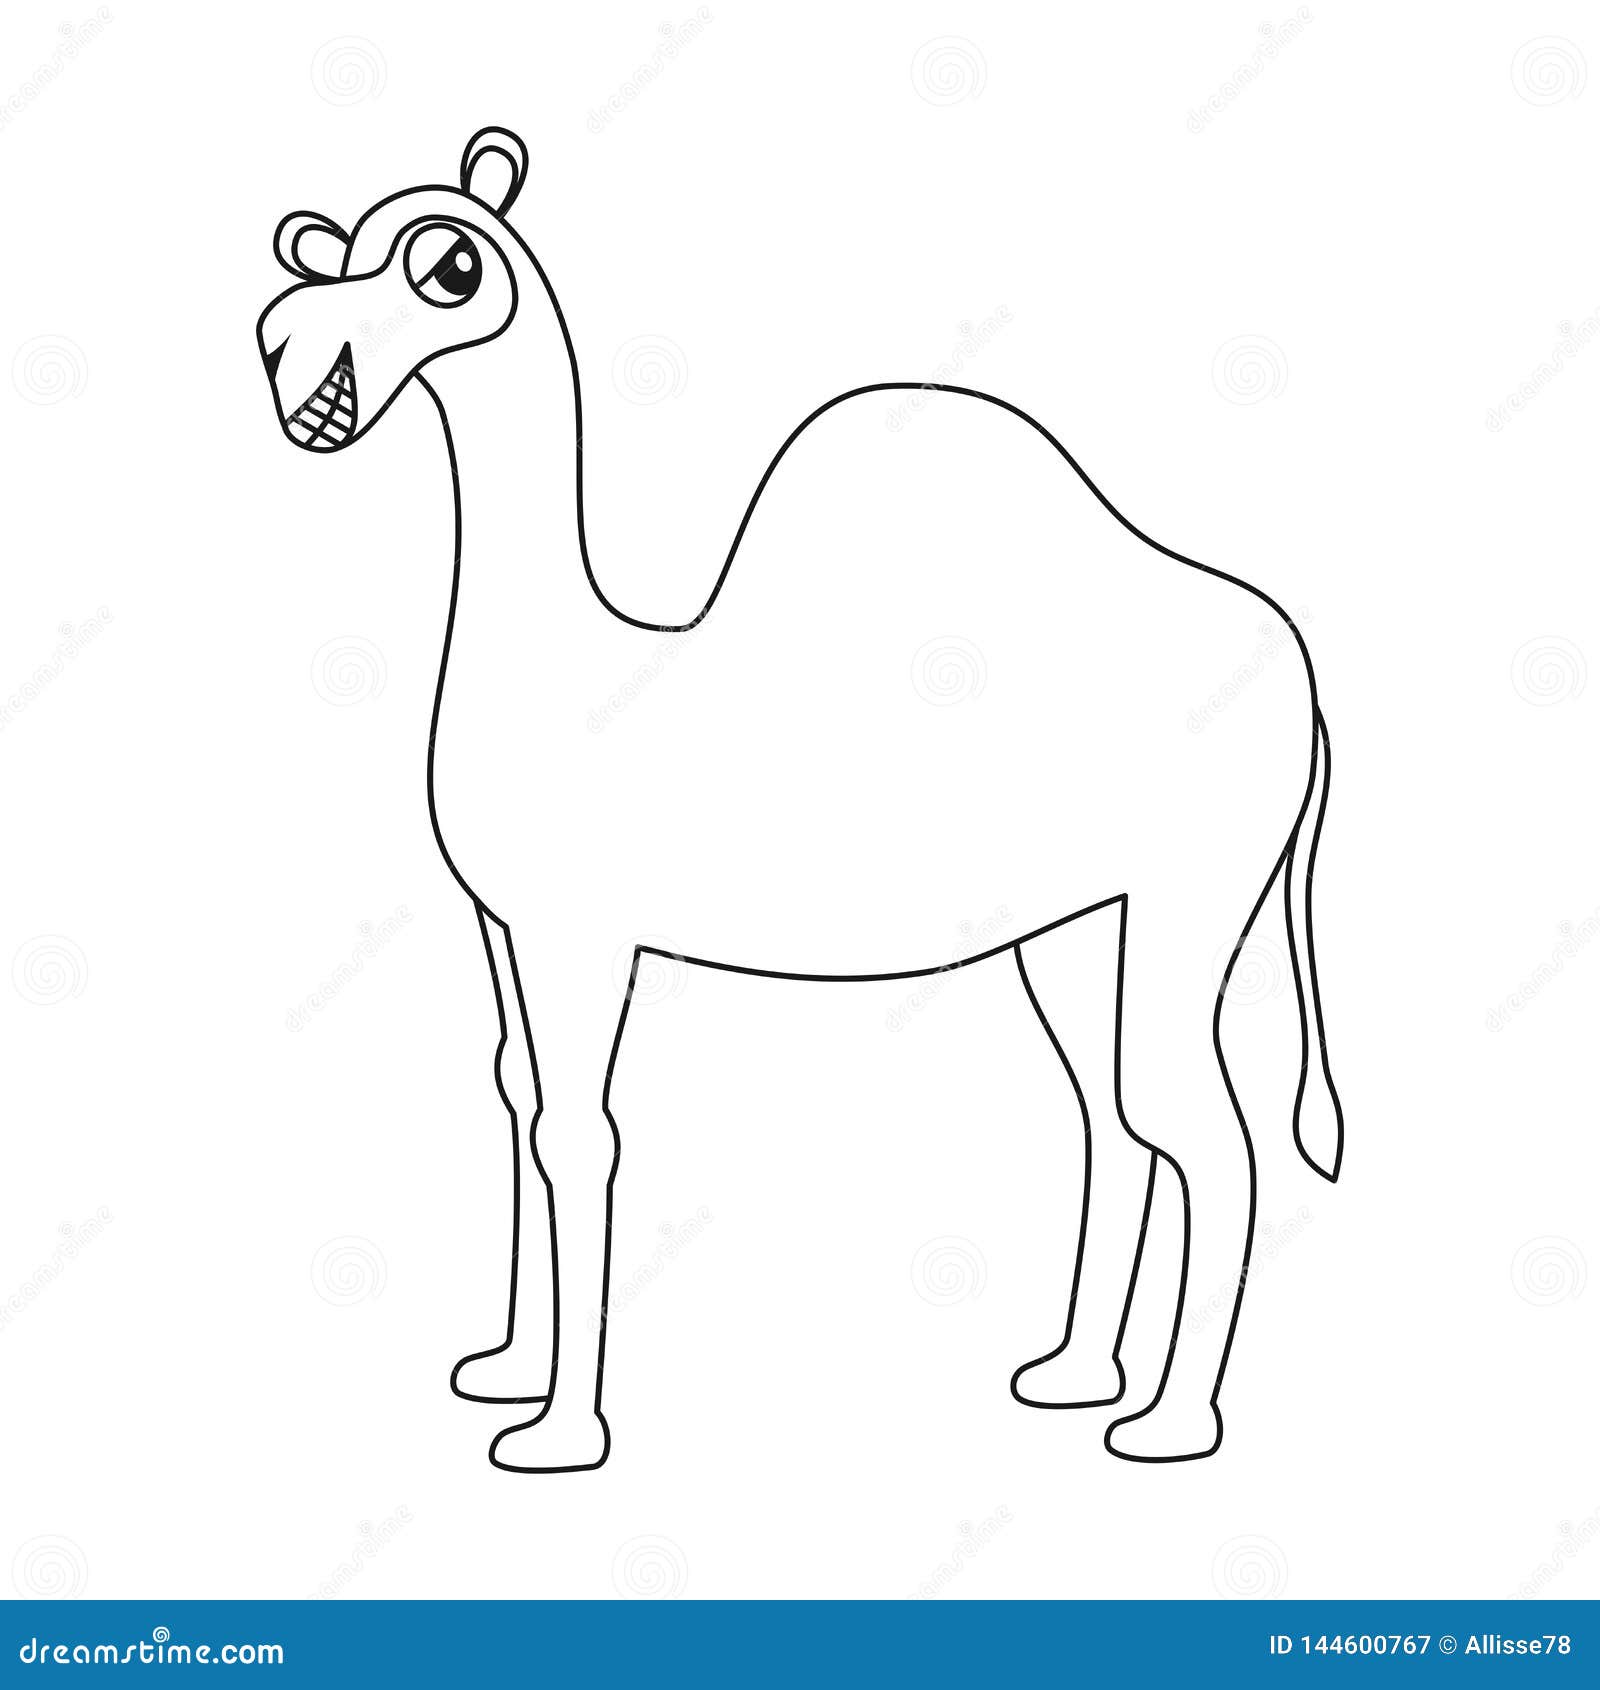 Download Cute Cartoon Camel Dromedary Black And White Vector Illustration For Coloring Art Stock Vector ...